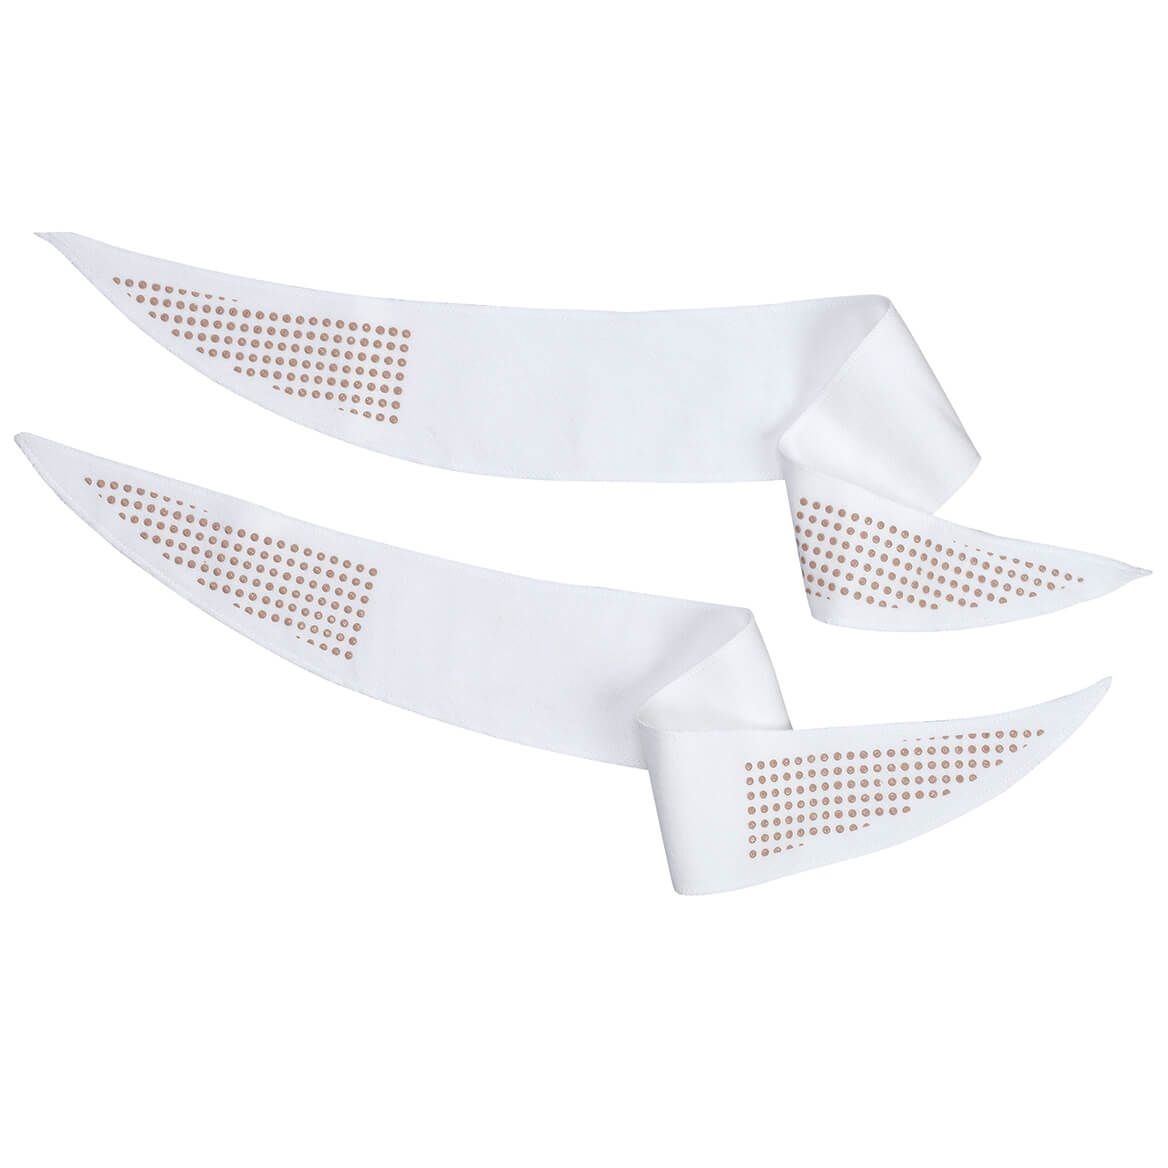 Tummy Liners with Anti-Slip Comfort Dots - Miles Kimball